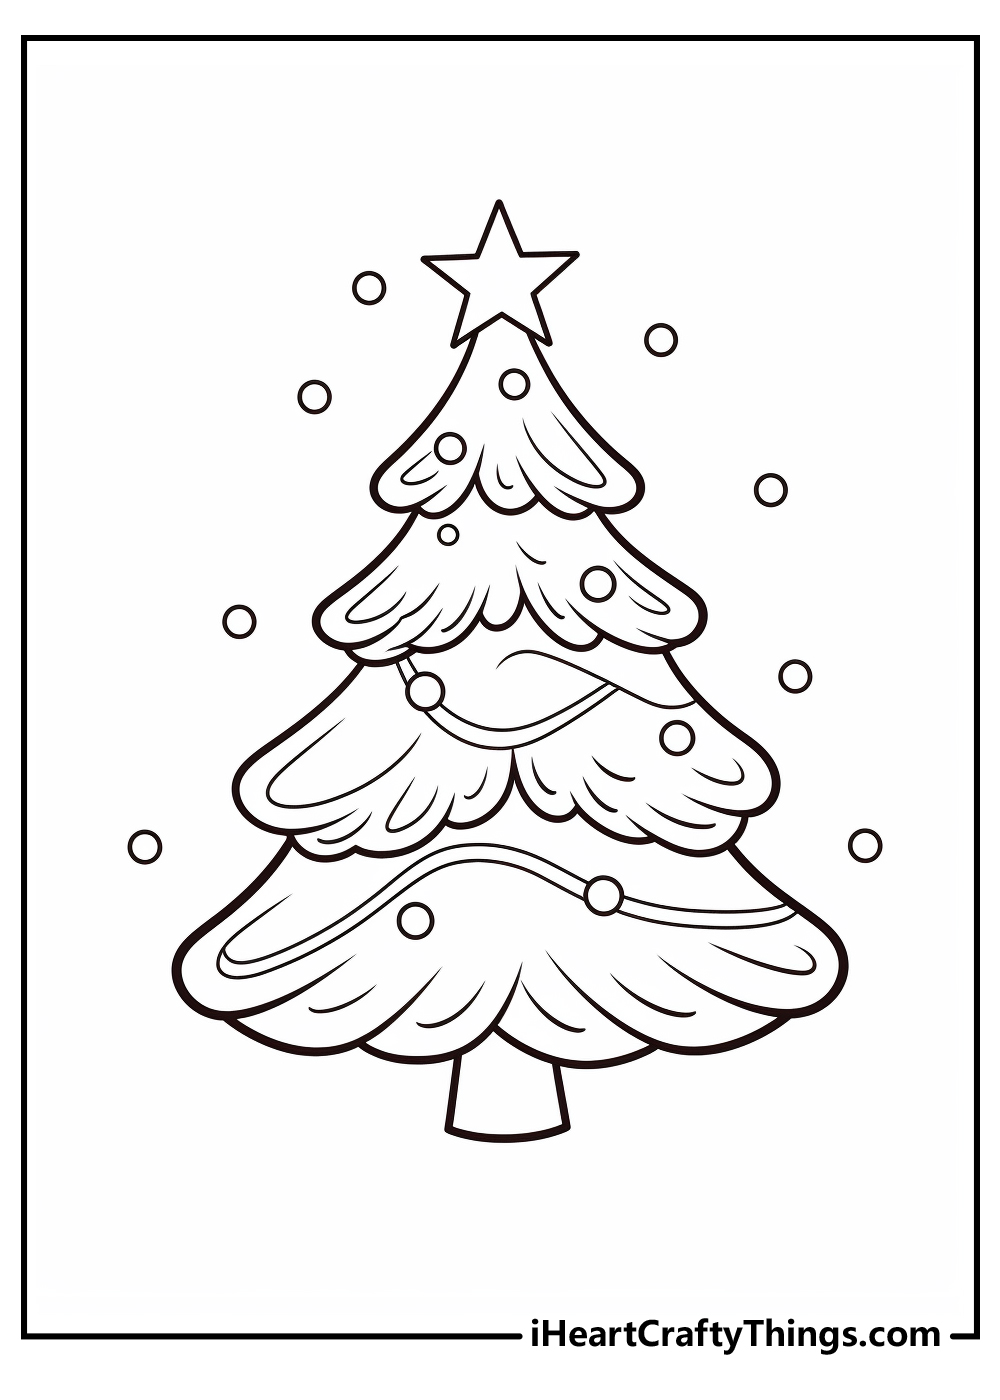 december coloring printable for adults